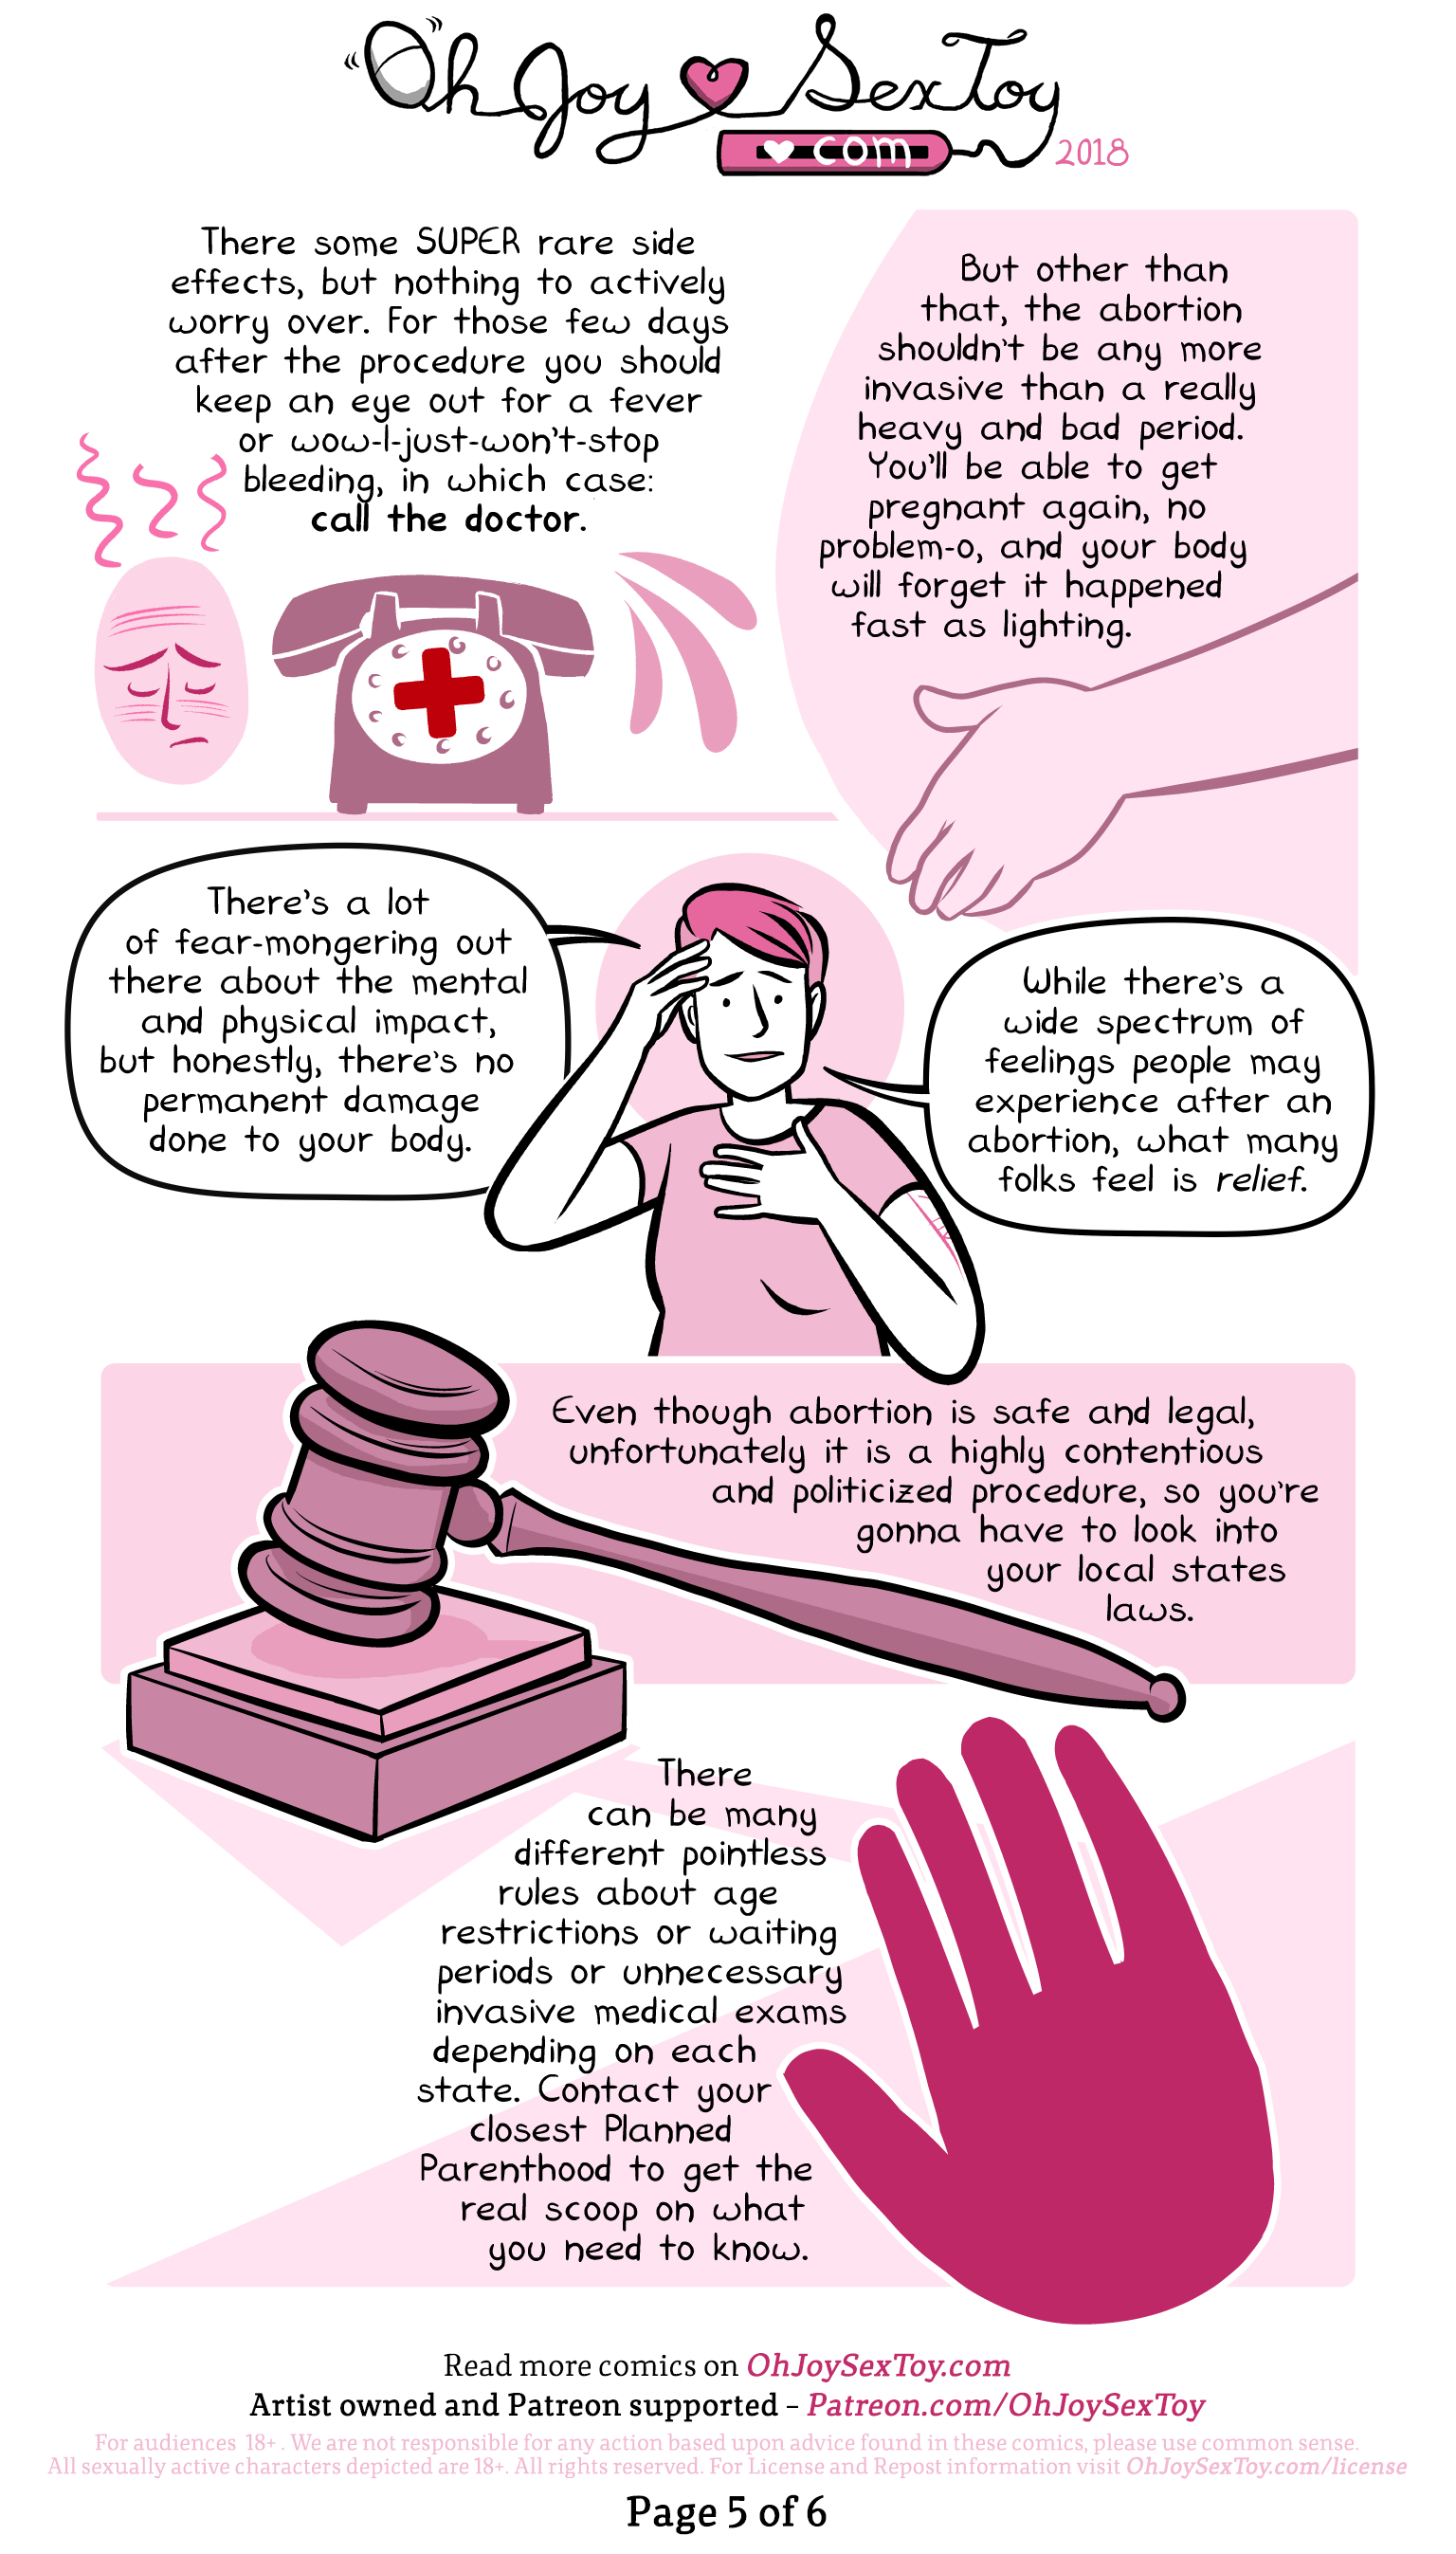 In-Clinic Abortion